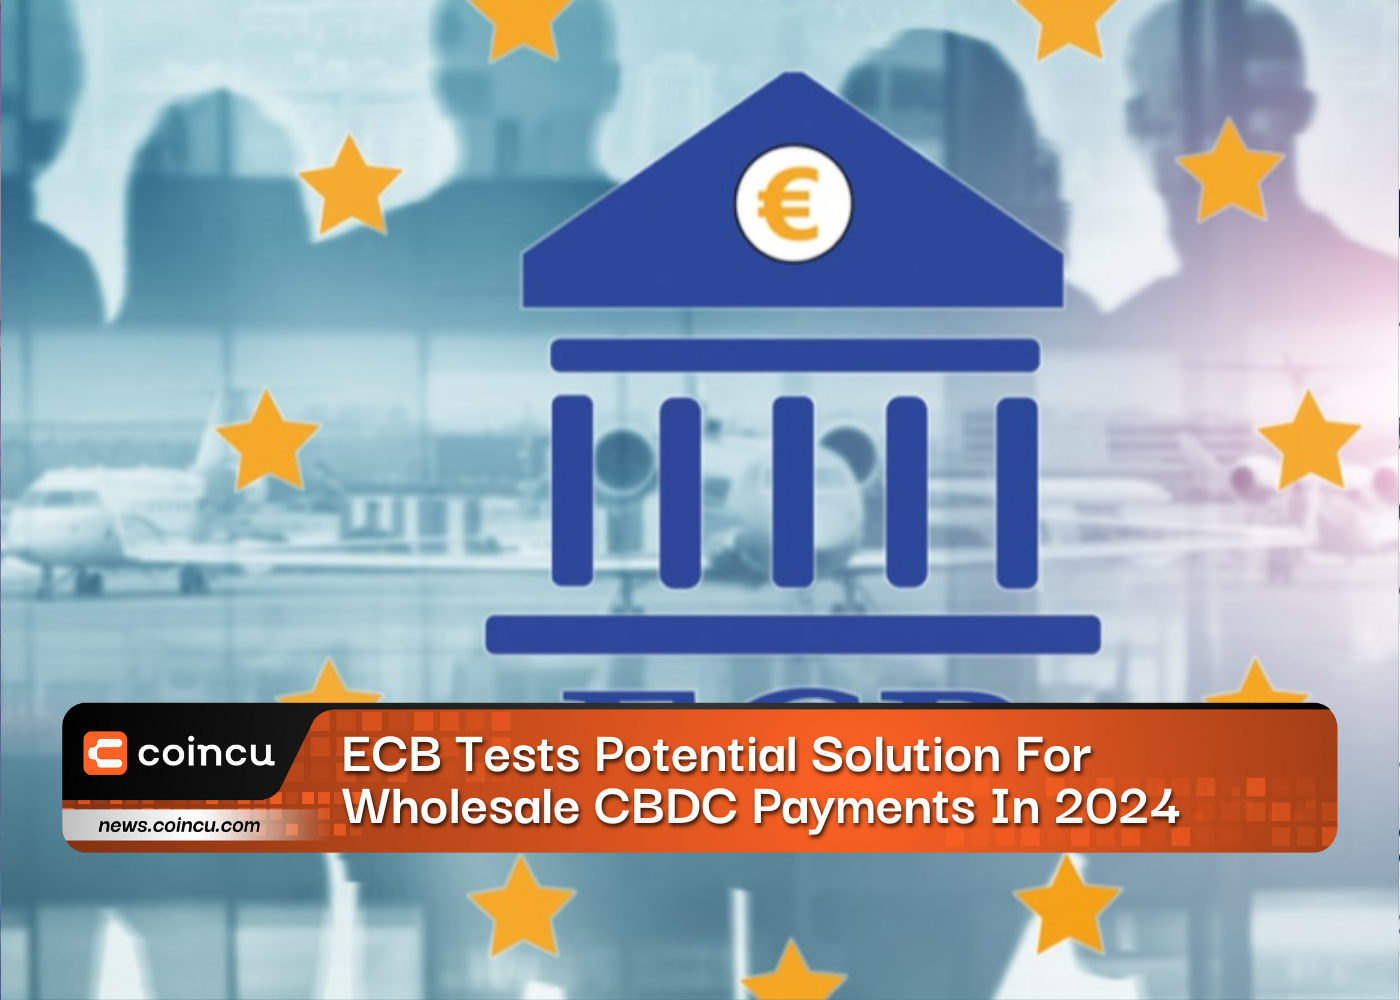 ECB Tests Potential Solution For Wholesale CBDC Payments In 2024